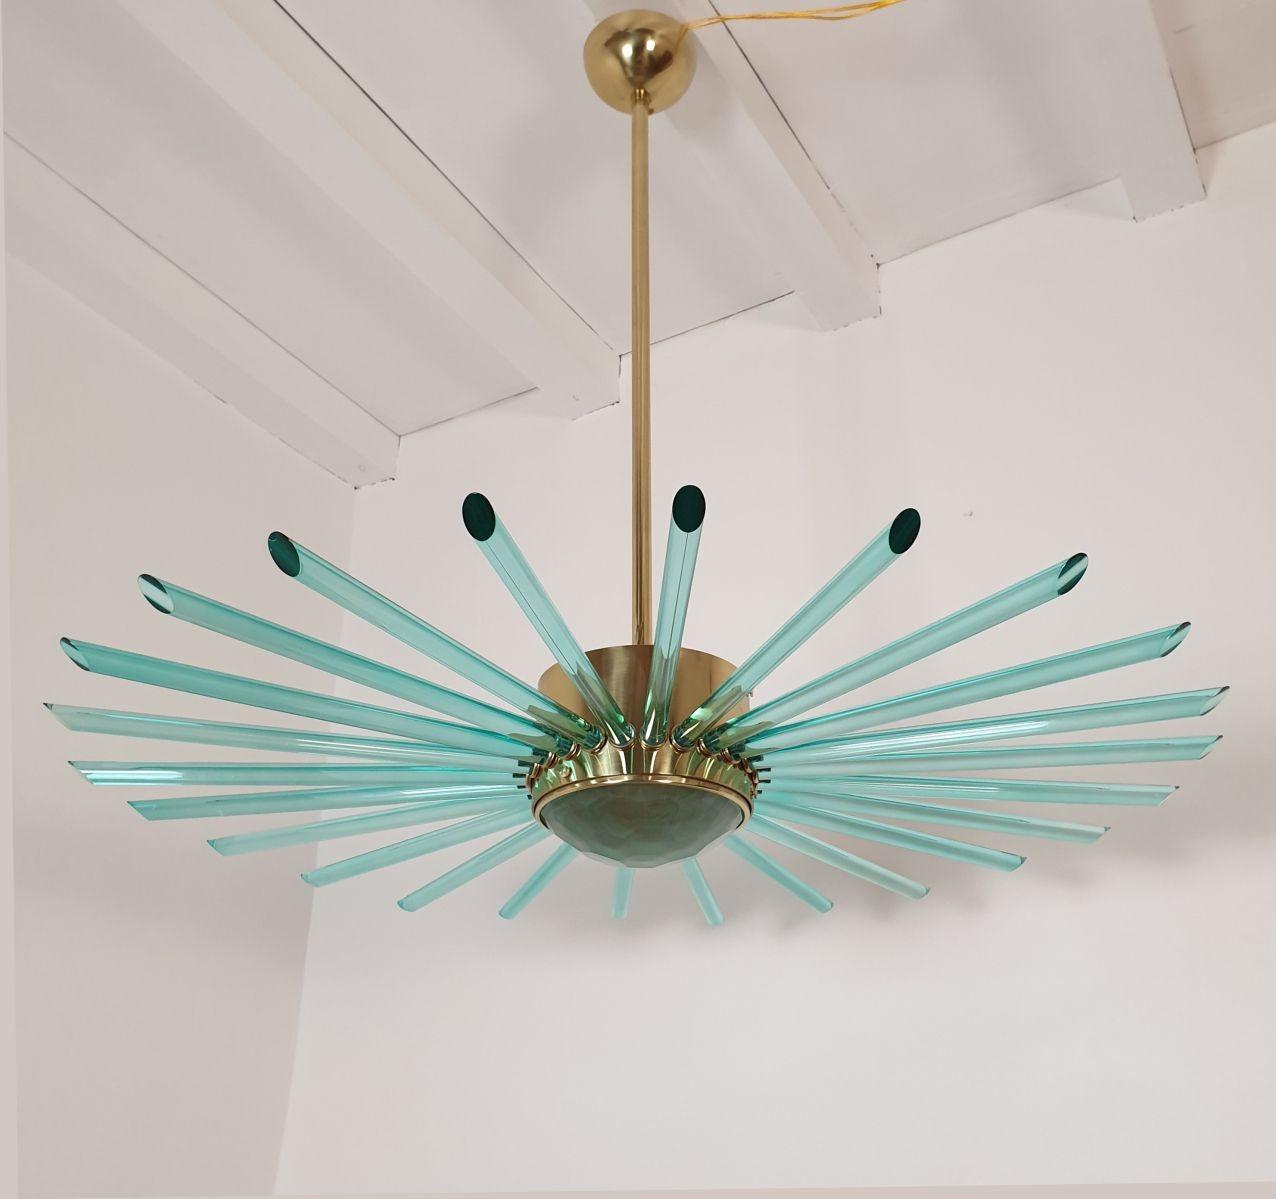 Large Mid Century Modern Sputnik chandelier, Italy 1980s.
The chandelier is made of a polished brass frame and green plain glass tubes.
The center bottom glass is pale green and translucent, nesting the light.
The chandelier is professionally